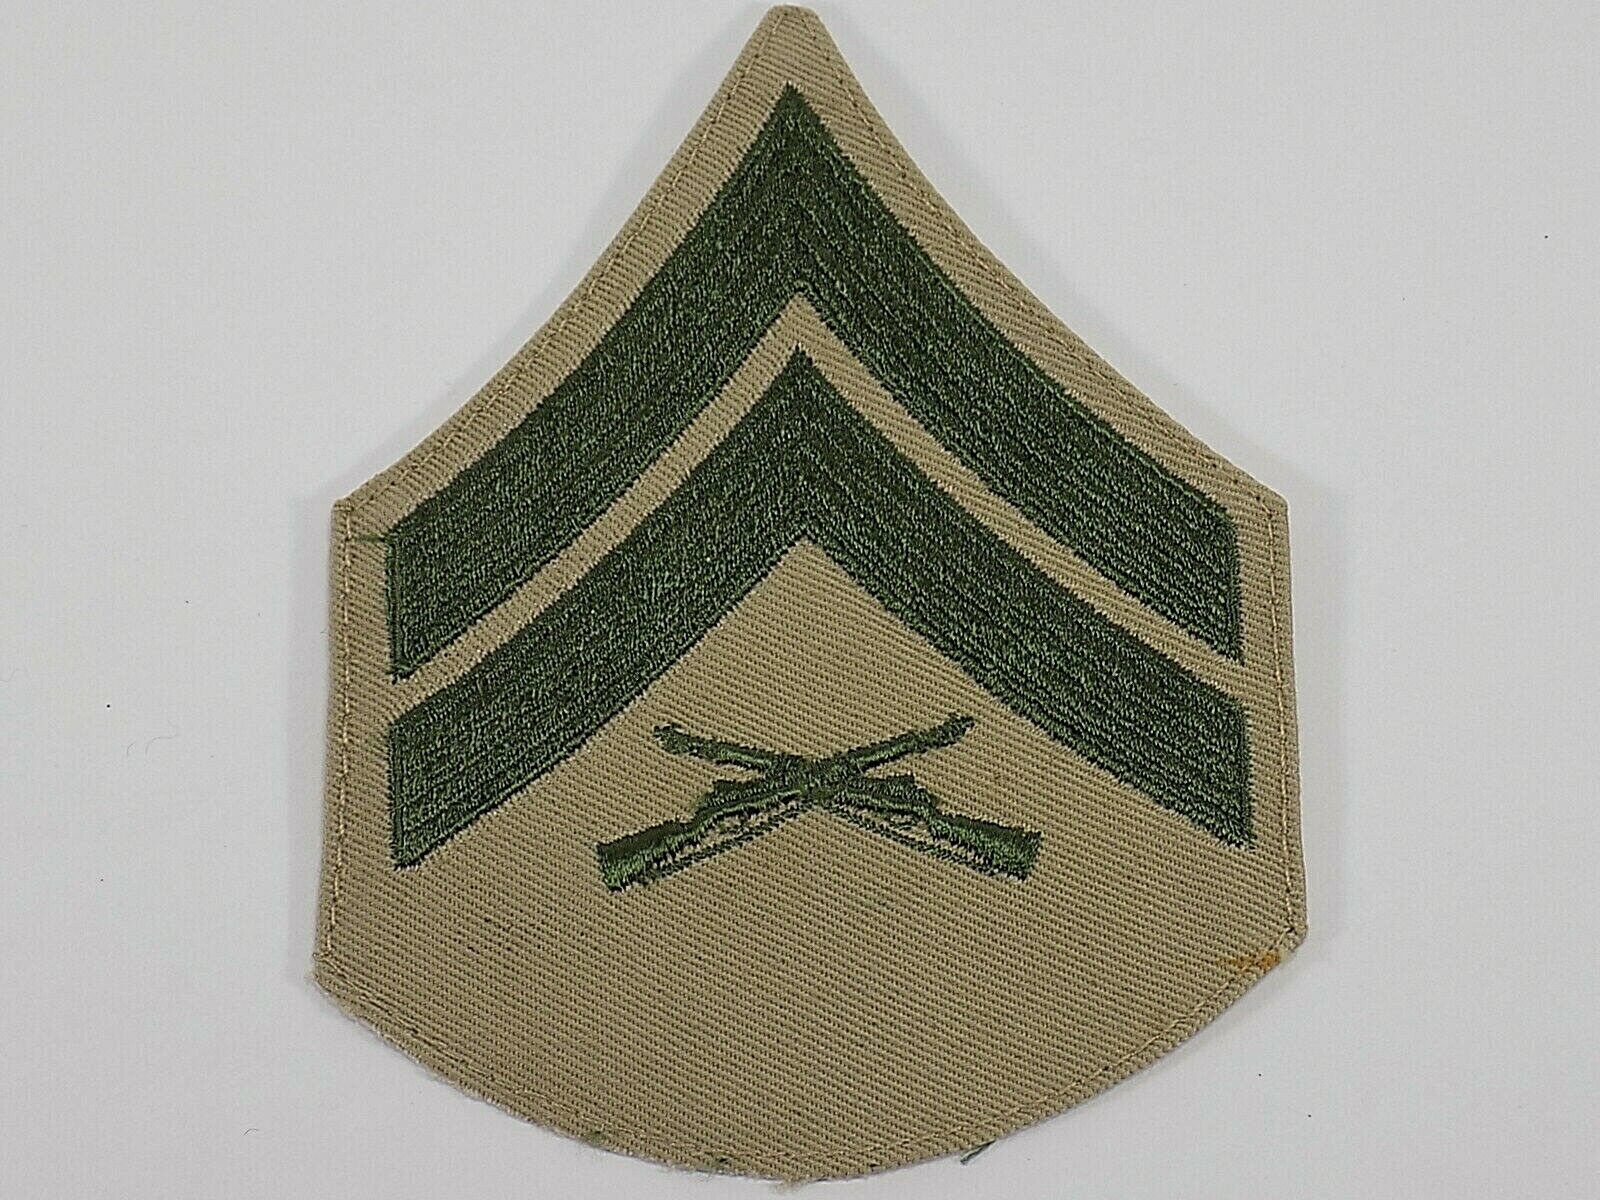 Primary image for Vintage US ARMY VIETNAM WAR CORPORAL INFANTRY SHOULDER SEW ON RANK PATCH